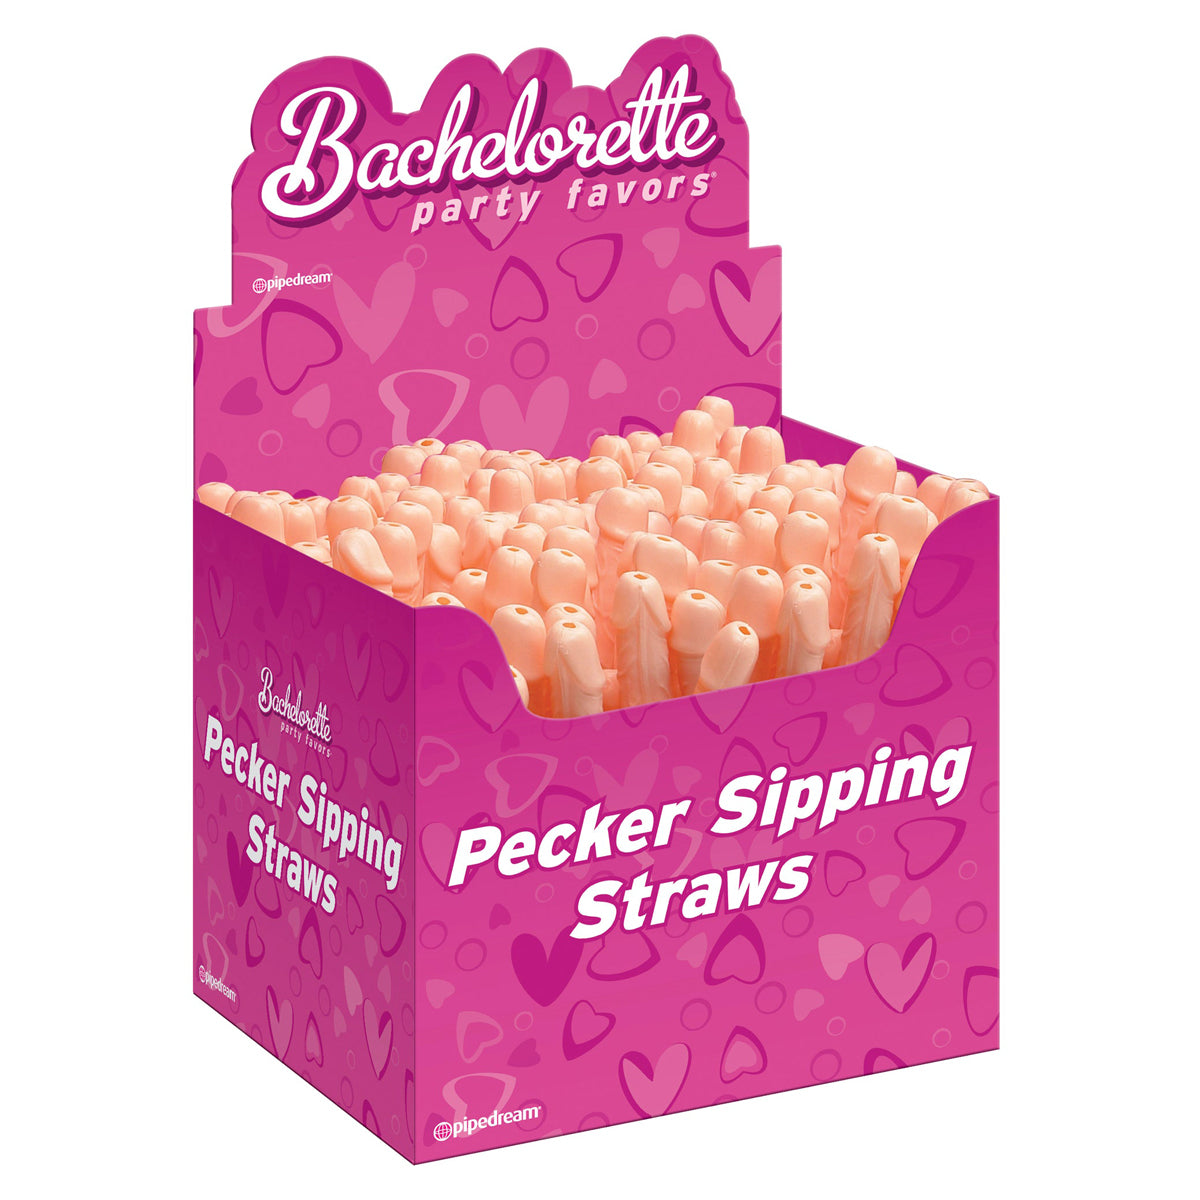 Pipedream - Bachelorette Party Favours - Pecker Sipping Straws